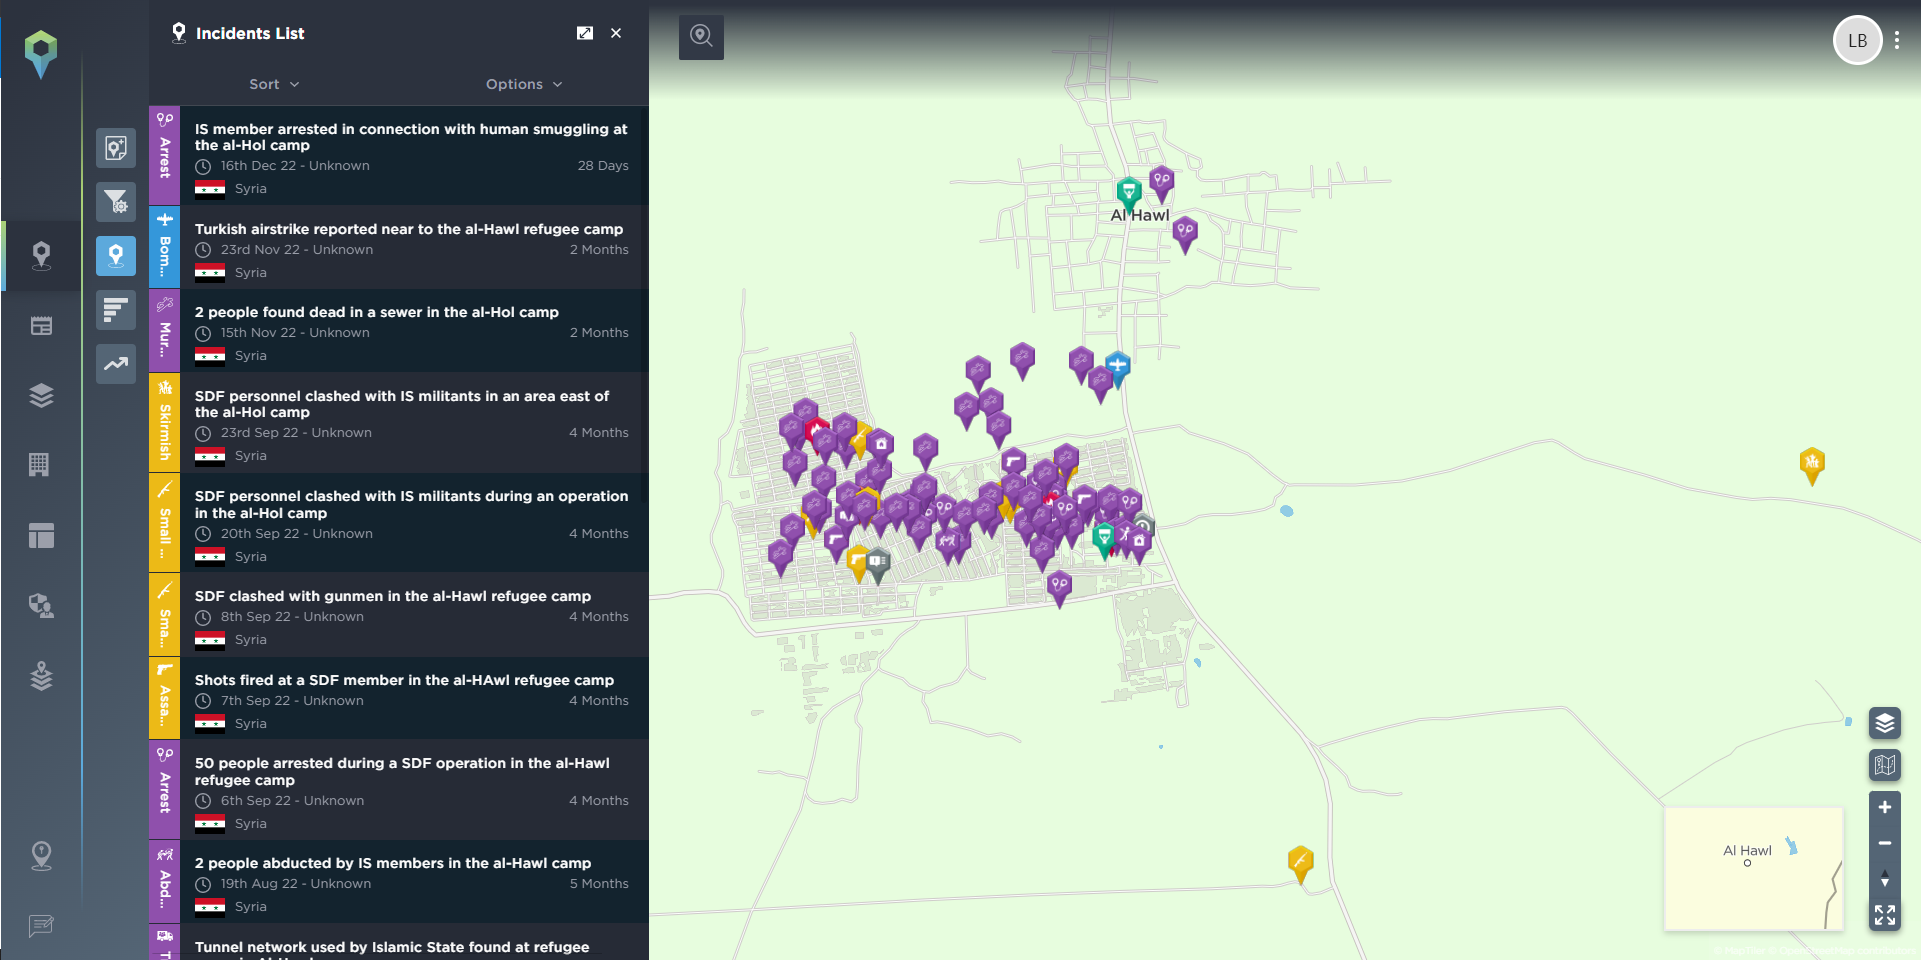 Overview of security incidents reported at Al-Hol refugee camp in Syria